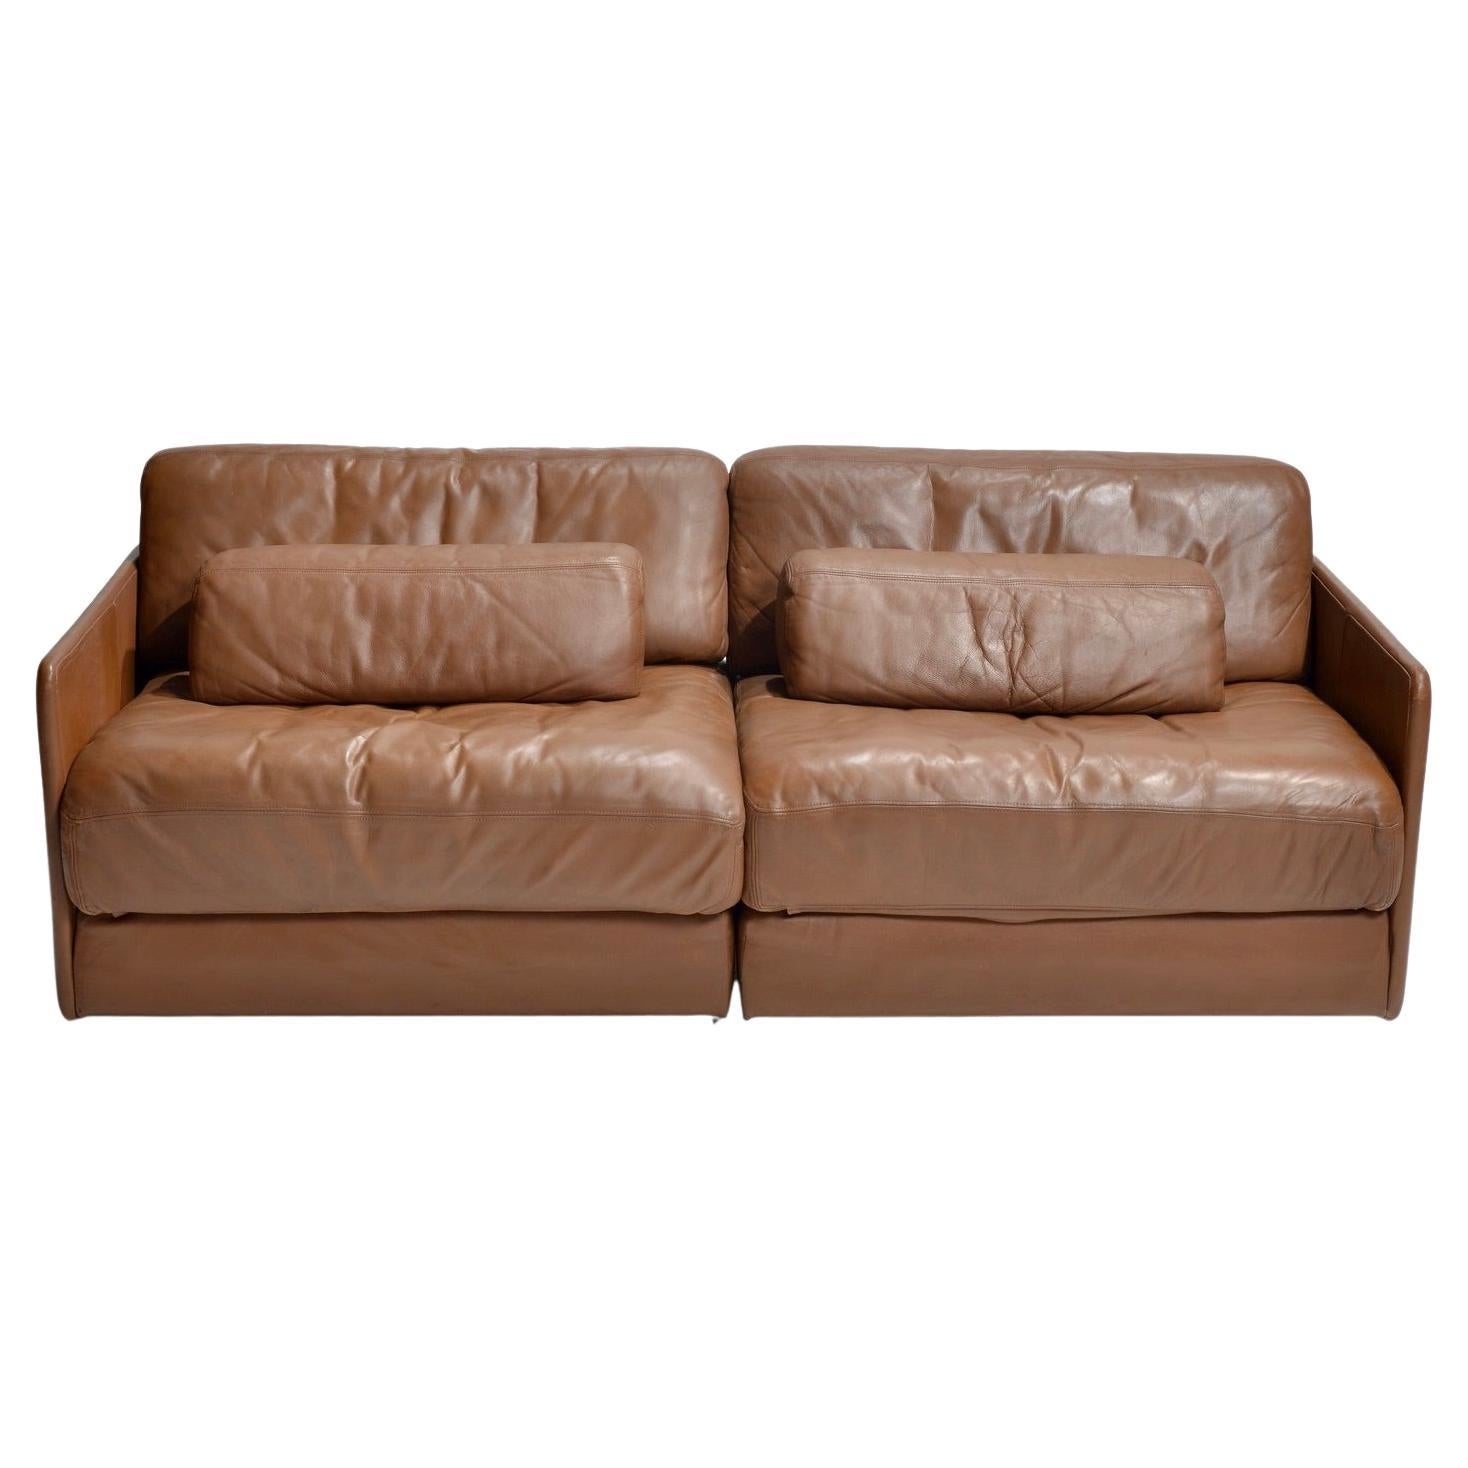 De Sede love seat double seat sectional of high quality leather with beautiful patina giving it an aged premium leather look. Functions in multiple configurations as well as two day beds. Unique style and superior craftsmanship make this a highly